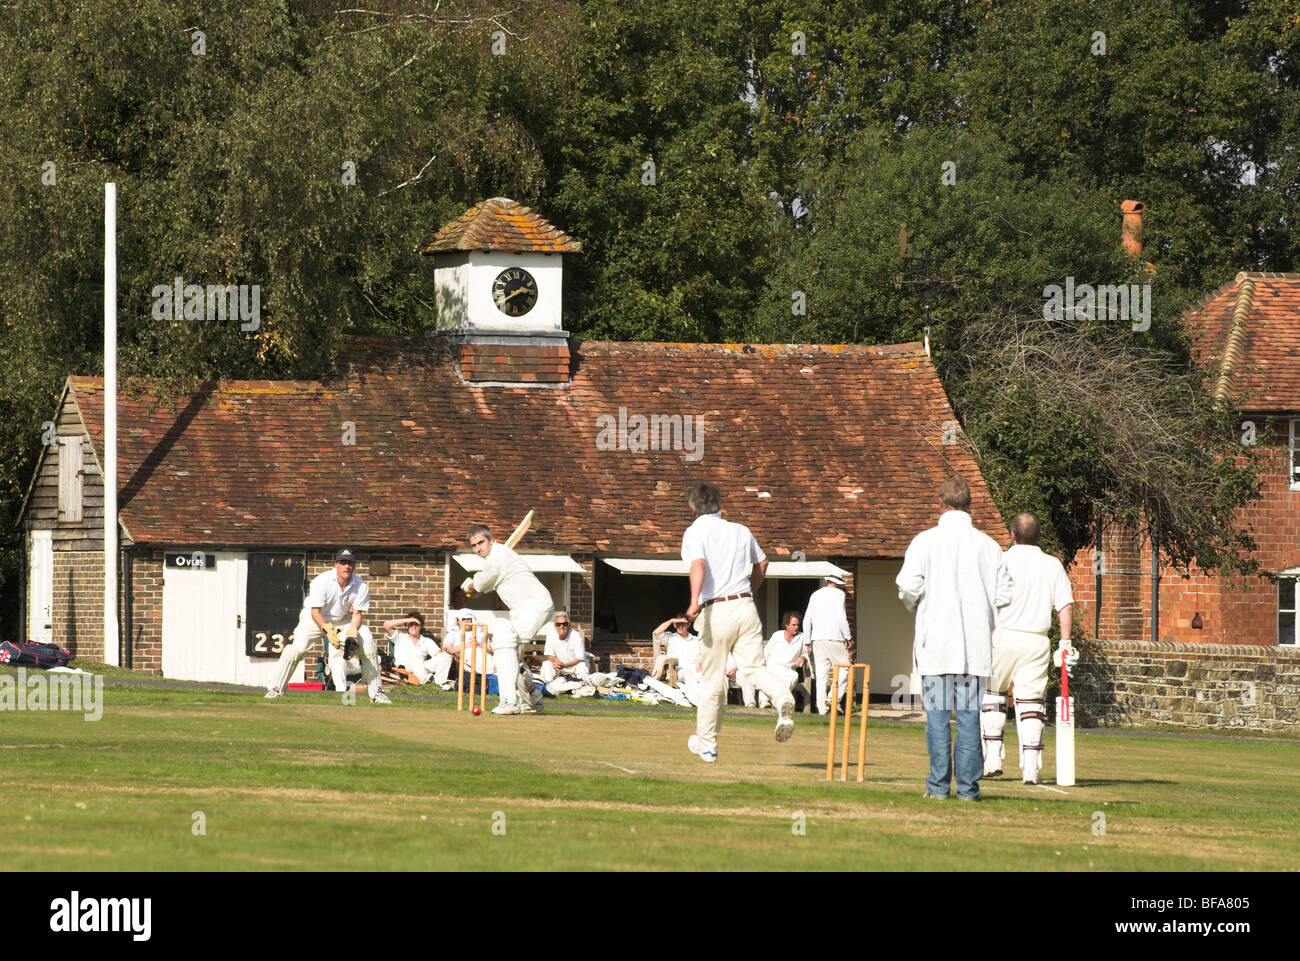 Lurgashall village green sees players participating in a game of cricket on a warm sunny autumn day. Stock Photo